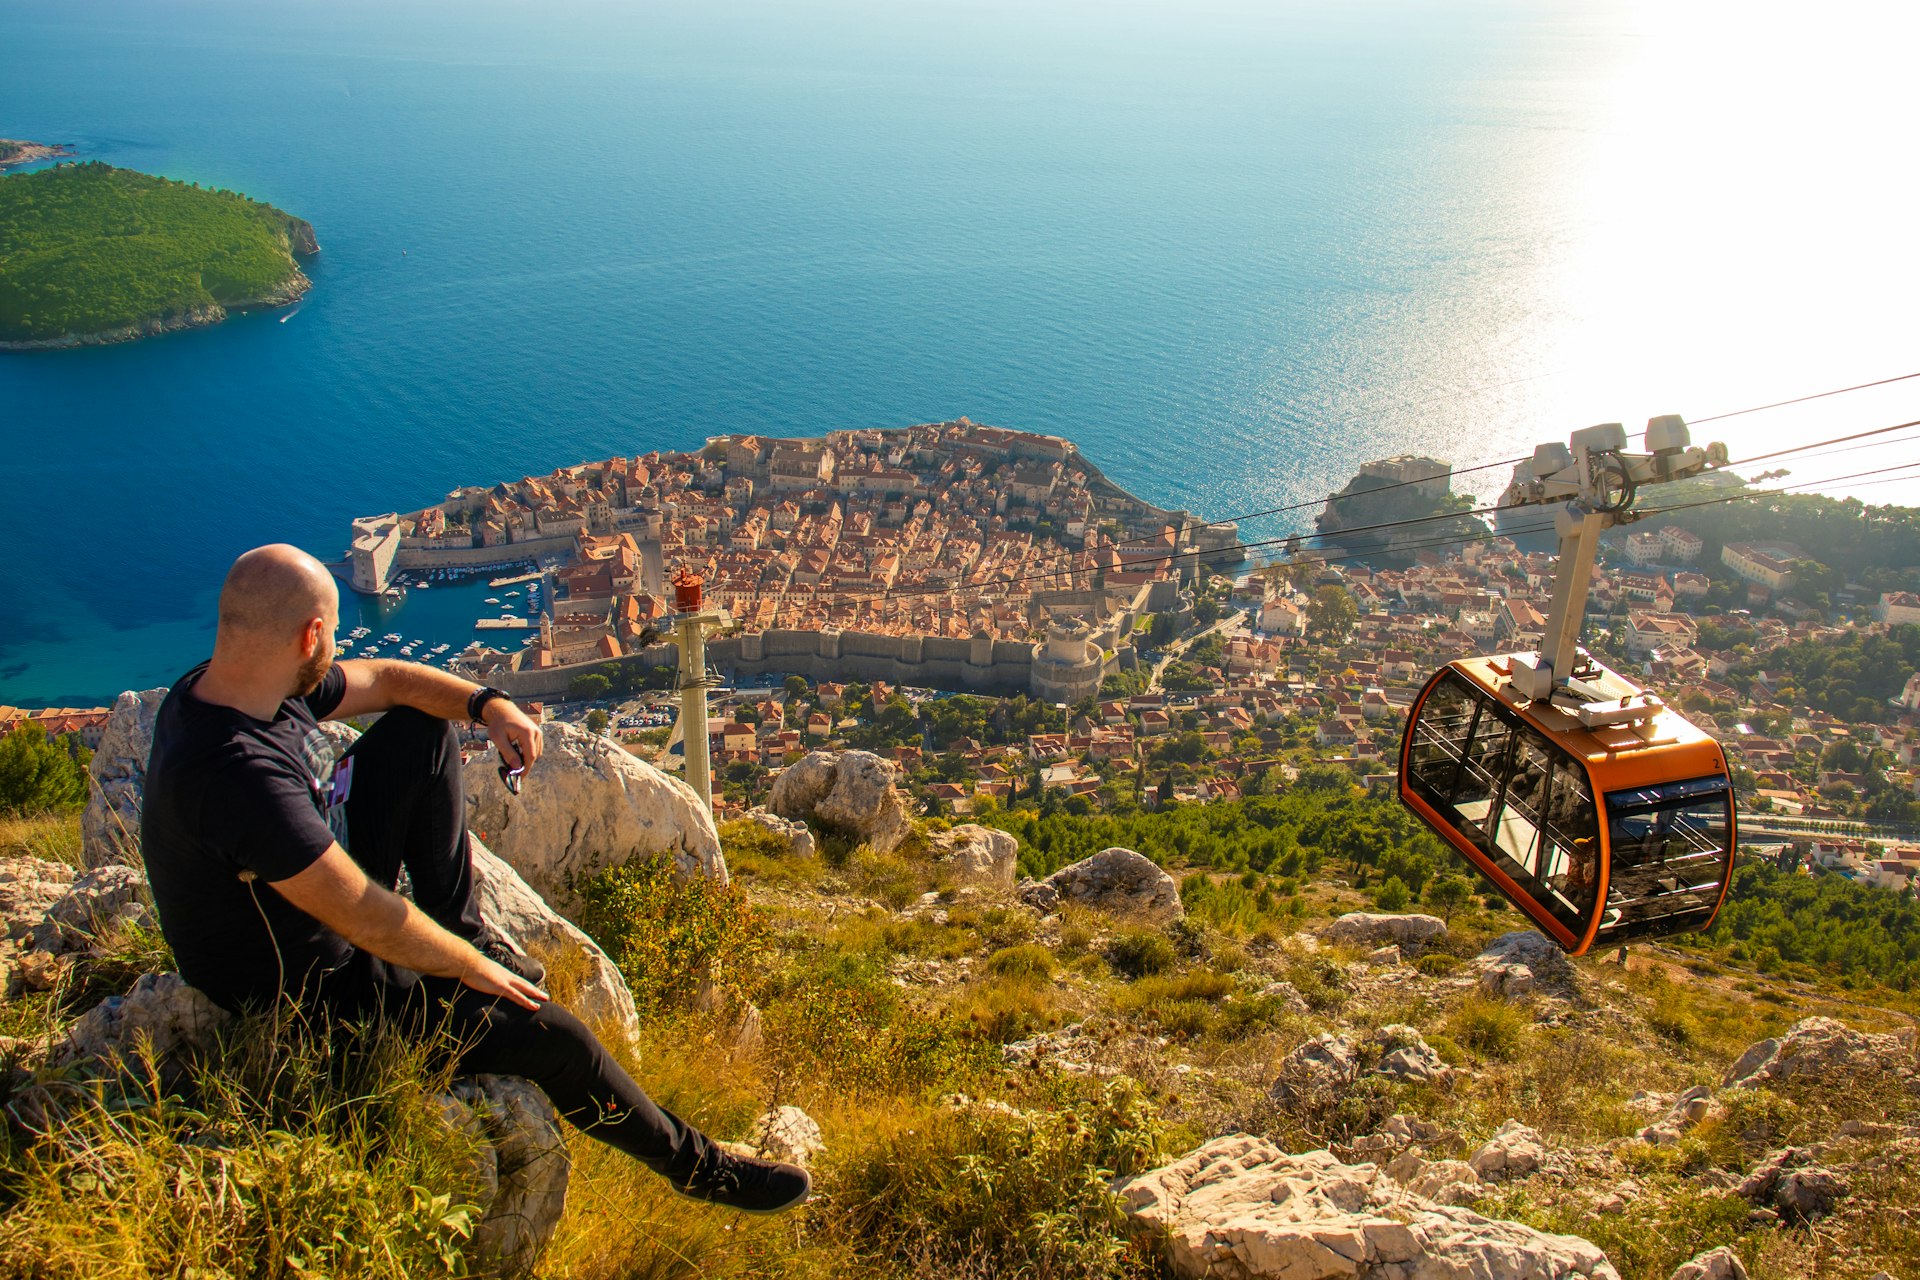 Wide shot from the top of the Srd mountain, man sitting on a rock observing the area around the city of Dubrovnik, orange cablecar descends to the city walls carrying tourist travelers in the summer.